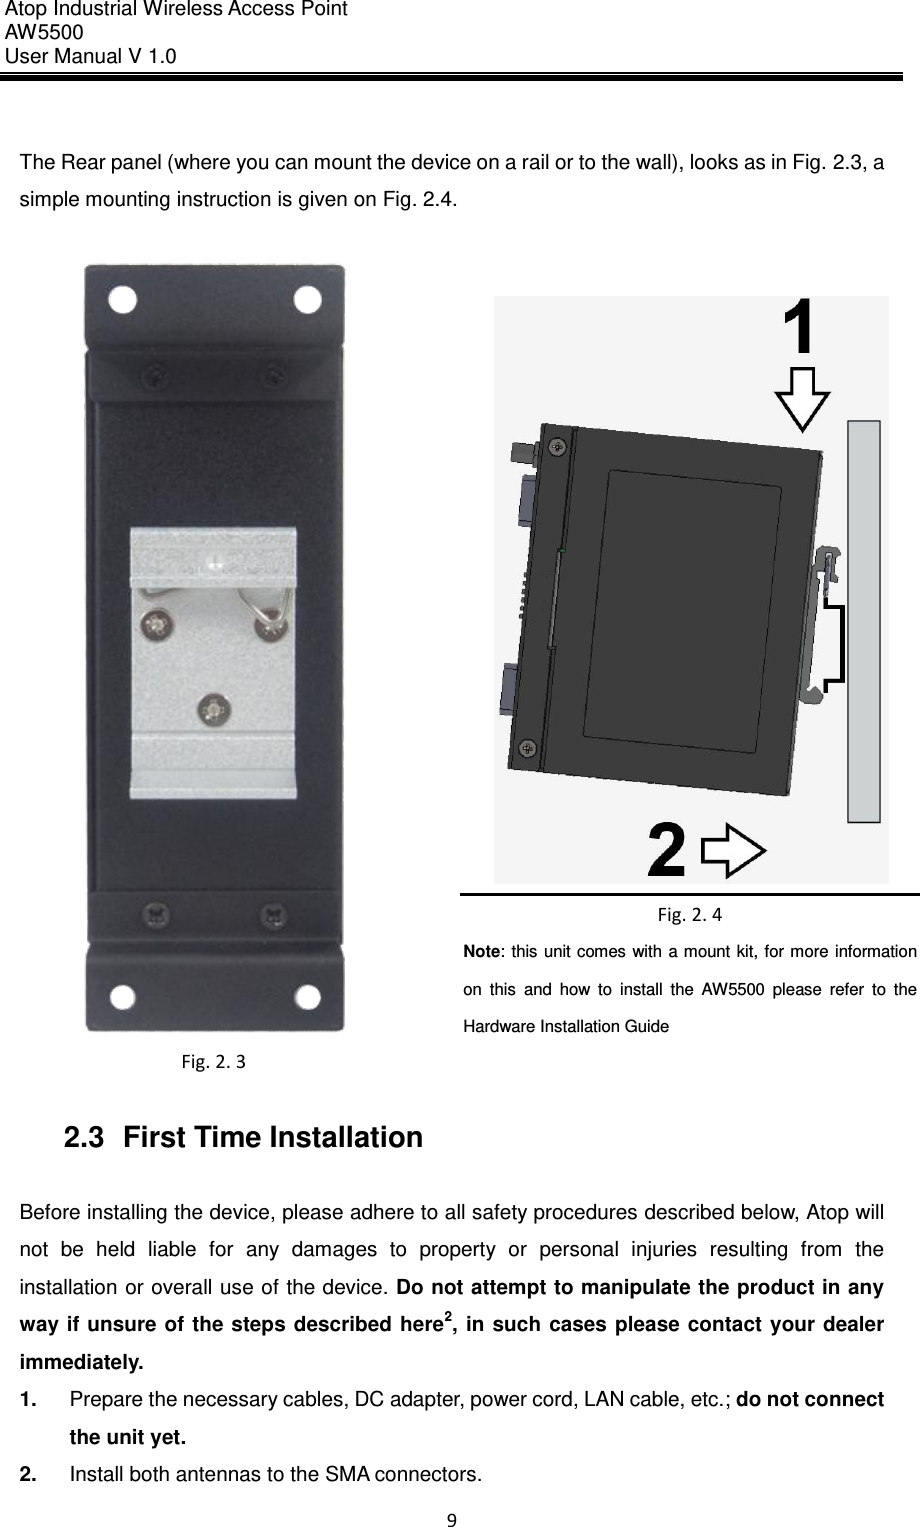 Atop Industrial Wireless Access Point AW 5500 User Manual V 1.0                      9   The Rear panel (where you can mount the device on a rail or to the wall), looks as in Fig. 2.3, a simple mounting instruction is given on Fig. 2.4.     Fig. 2. 3  Fig. 2. 4 Note: this unit comes with a mount kit, for more information on  this  and  how  to  install  the  AW5500  please  refer  to  the Hardware Installation Guide  2.3  First Time Installation  Before installing the device, please adhere to all safety procedures described below, Atop will not  be  held  liable  for  any  damages  to  property  or  personal  injuries  resulting  from  the installation or overall use of the device. Do not attempt to manipulate the product in any way if unsure of  the  steps described  here2,  in  such cases  please contact  your  dealer immediately.   1. Prepare the necessary cables, DC adapter, power cord, LAN cable, etc.; do not connect the unit yet. 2. Install both antennas to the SMA connectors. 